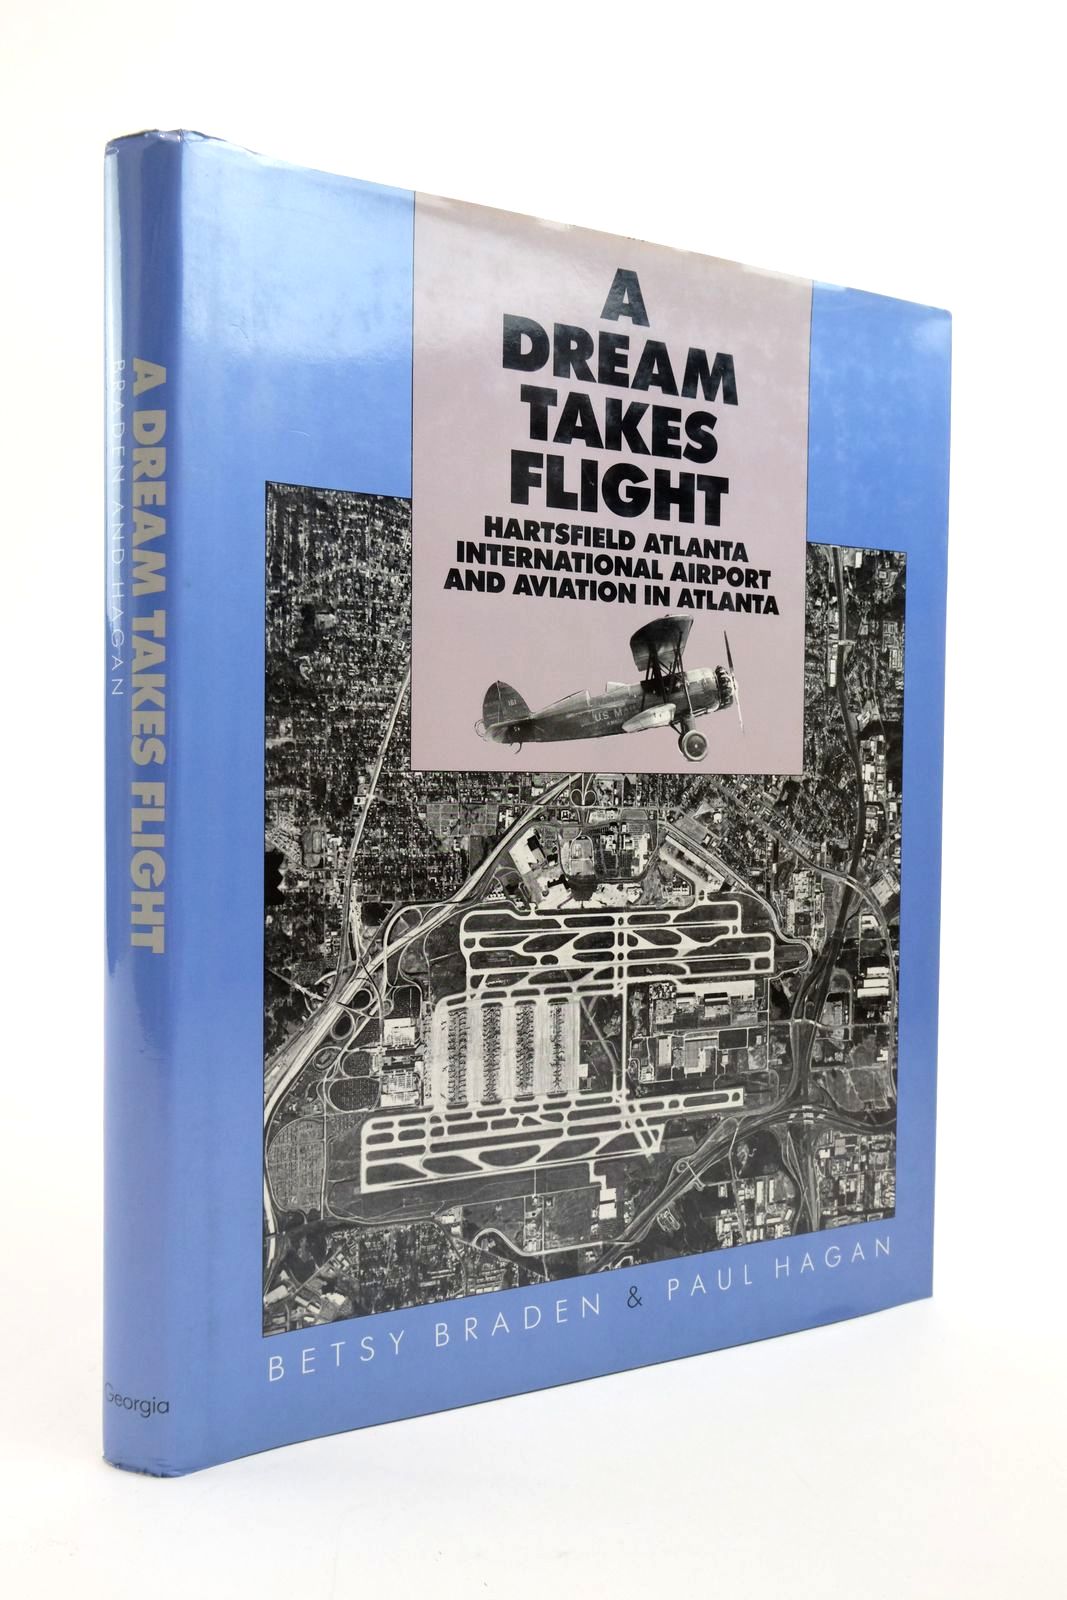 Photo of A DREAM TAKES FLIGHT written by Braden, Betsy
Hagan, Paul published by The University of Georgia Press (STOCK CODE: 2138467)  for sale by Stella & Rose's Books